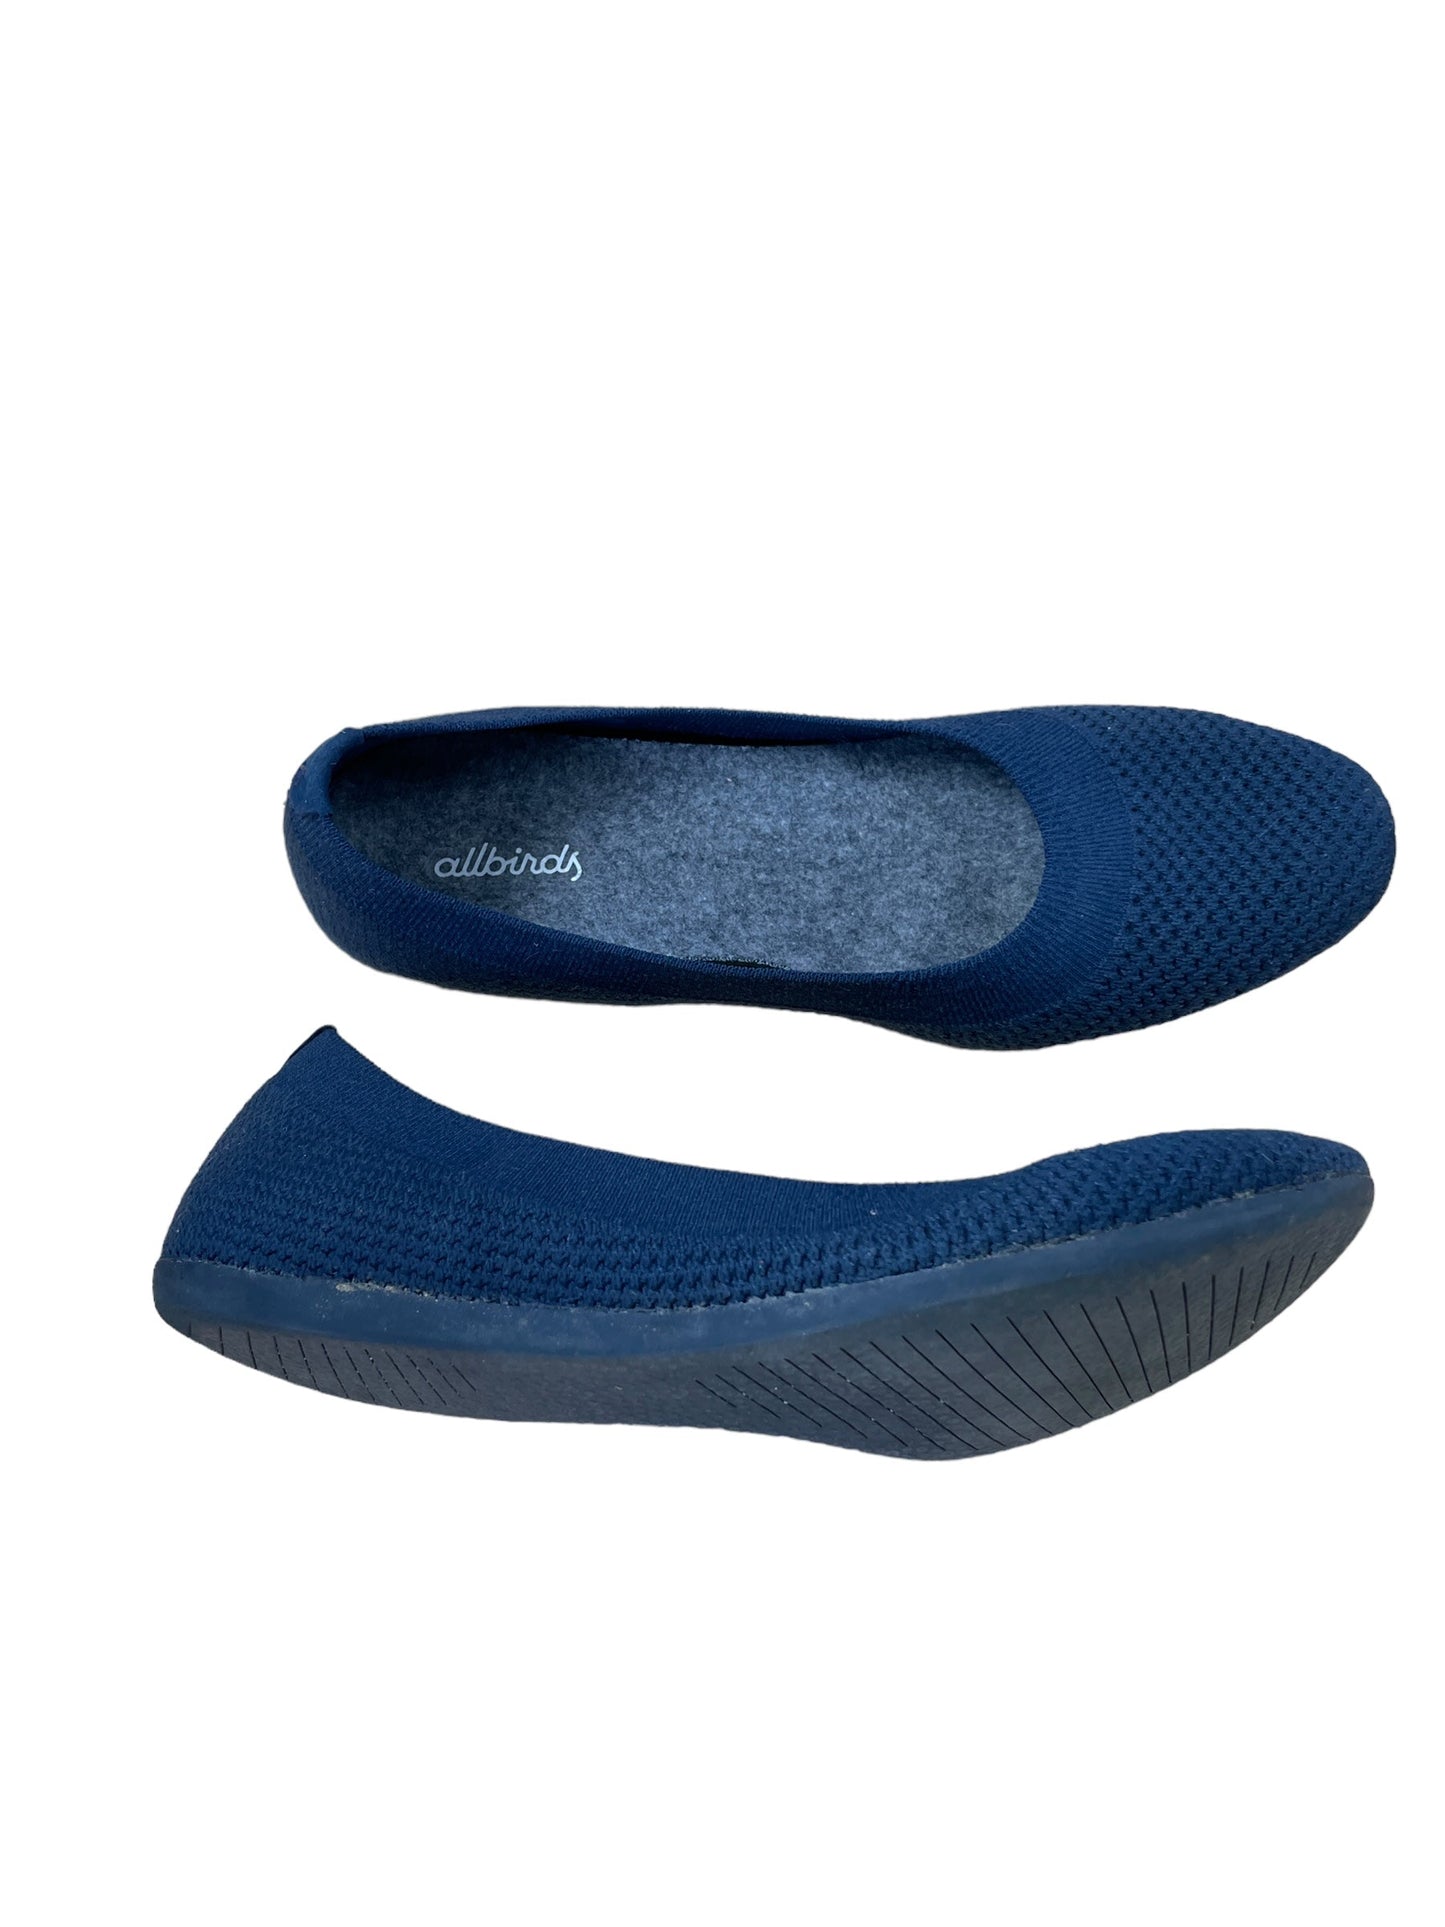 Shoes Flats By Allbirds  Size: 7